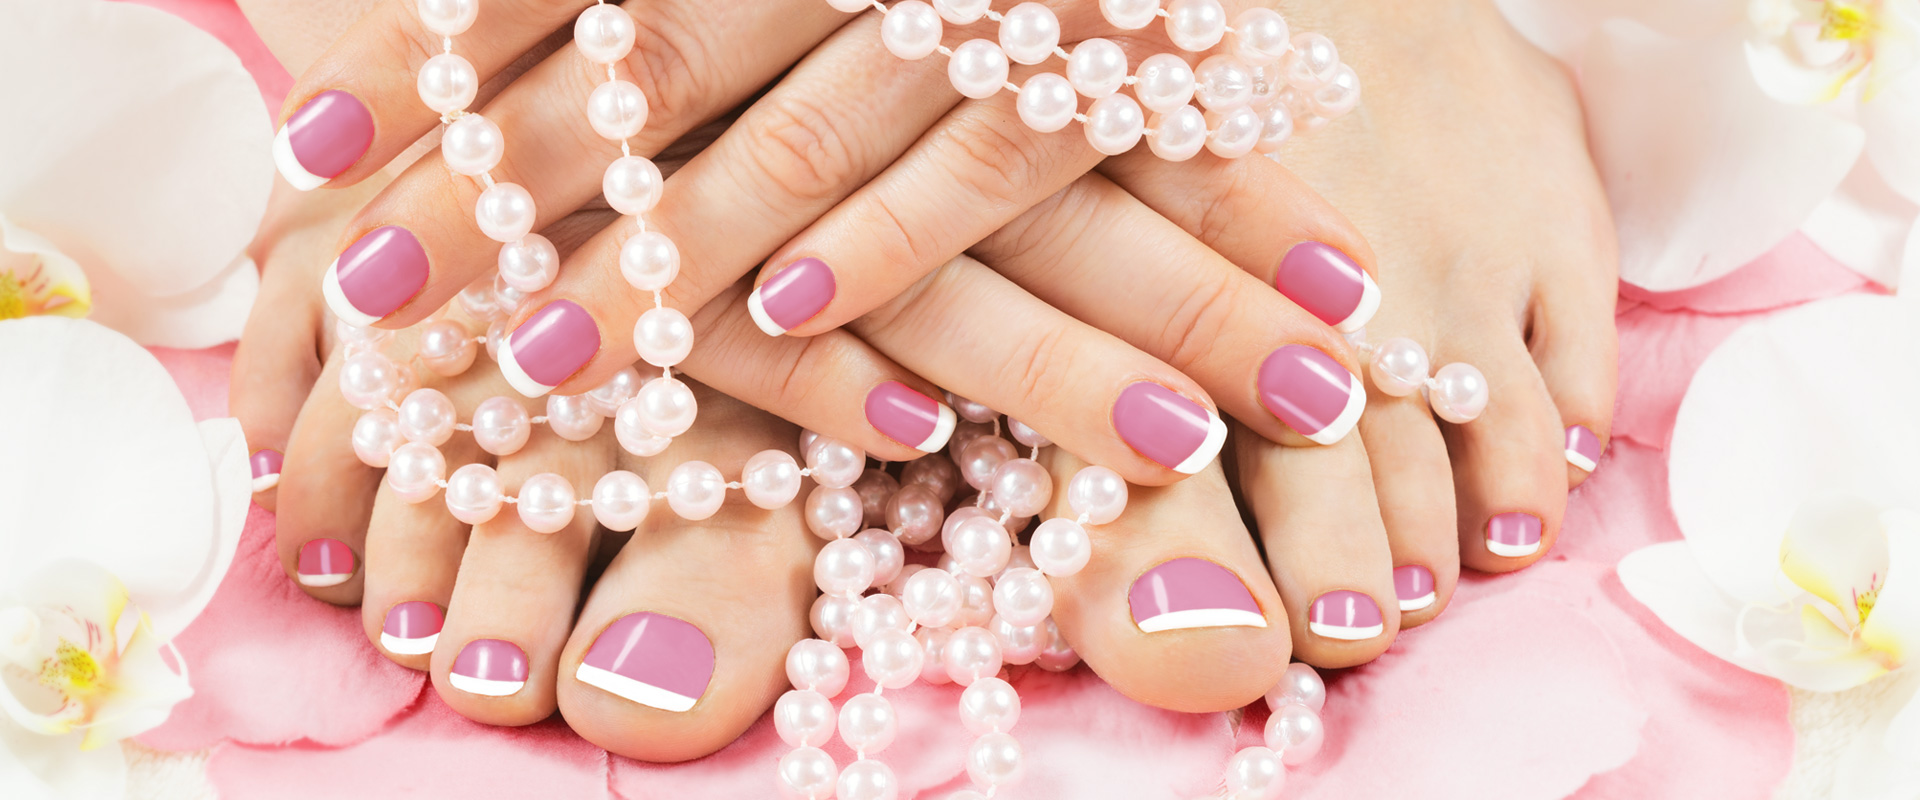 Manicure – Pedicure For Her - Nail Spa